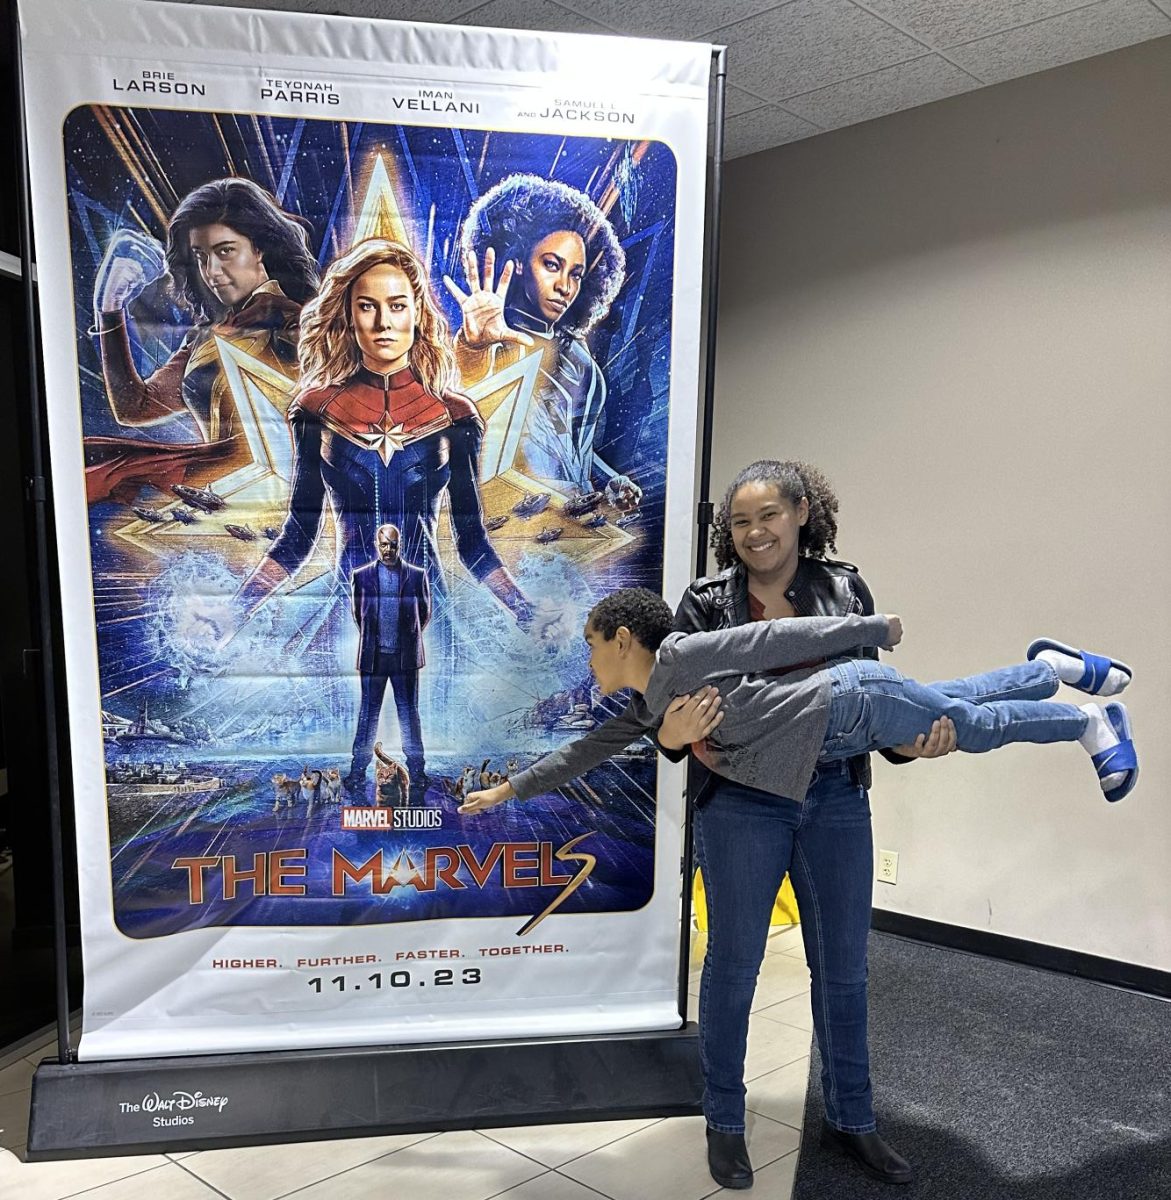 Me holding my little brother. Quincy Harris (Carriage Hill 2nd grader) as he superhero poses in front of the movie poster.